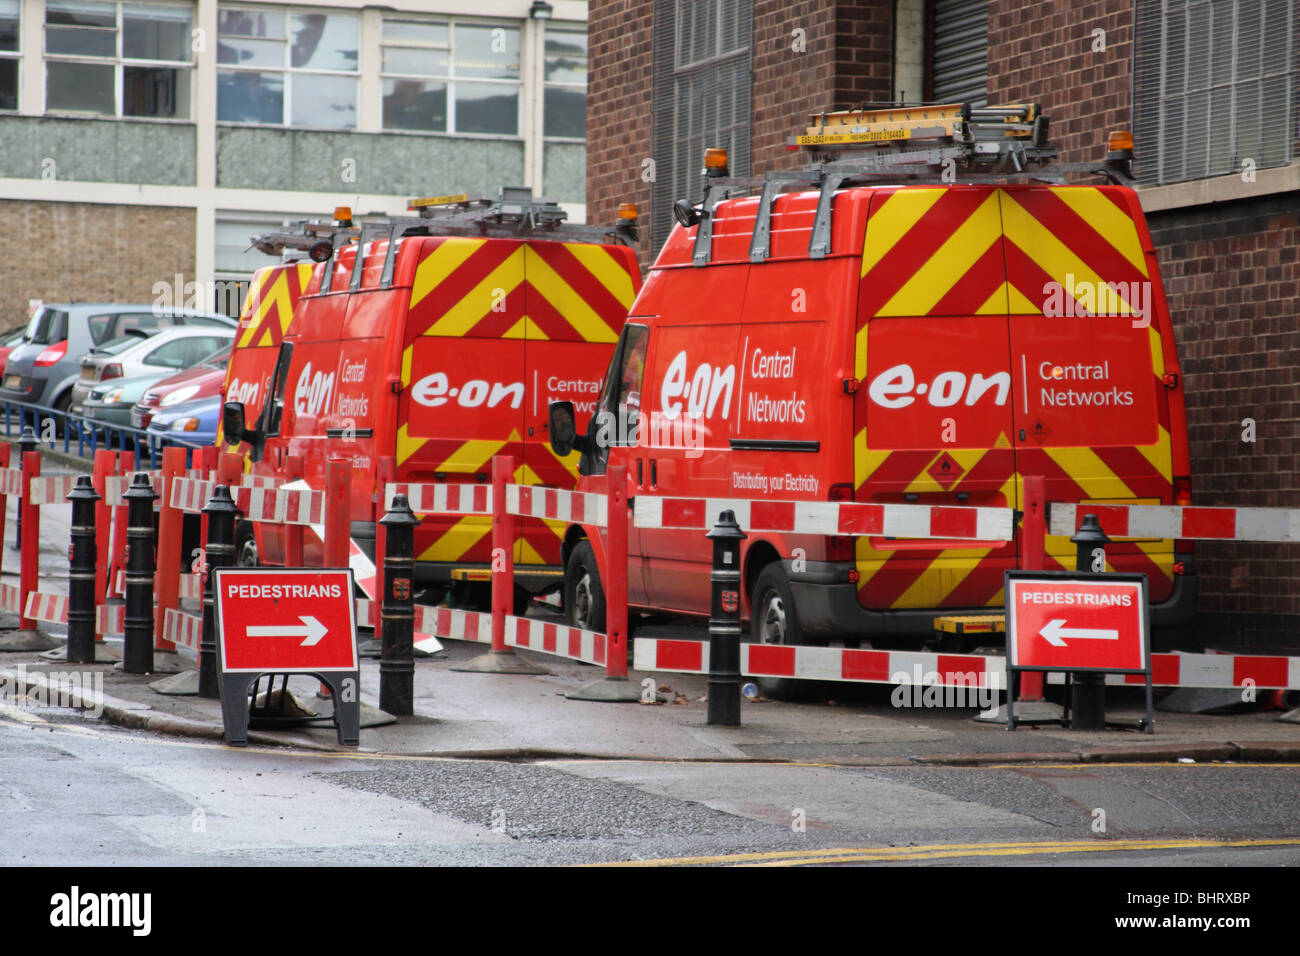 E-on Central Networks maintenance vans in a U.K. city. Stock Photo